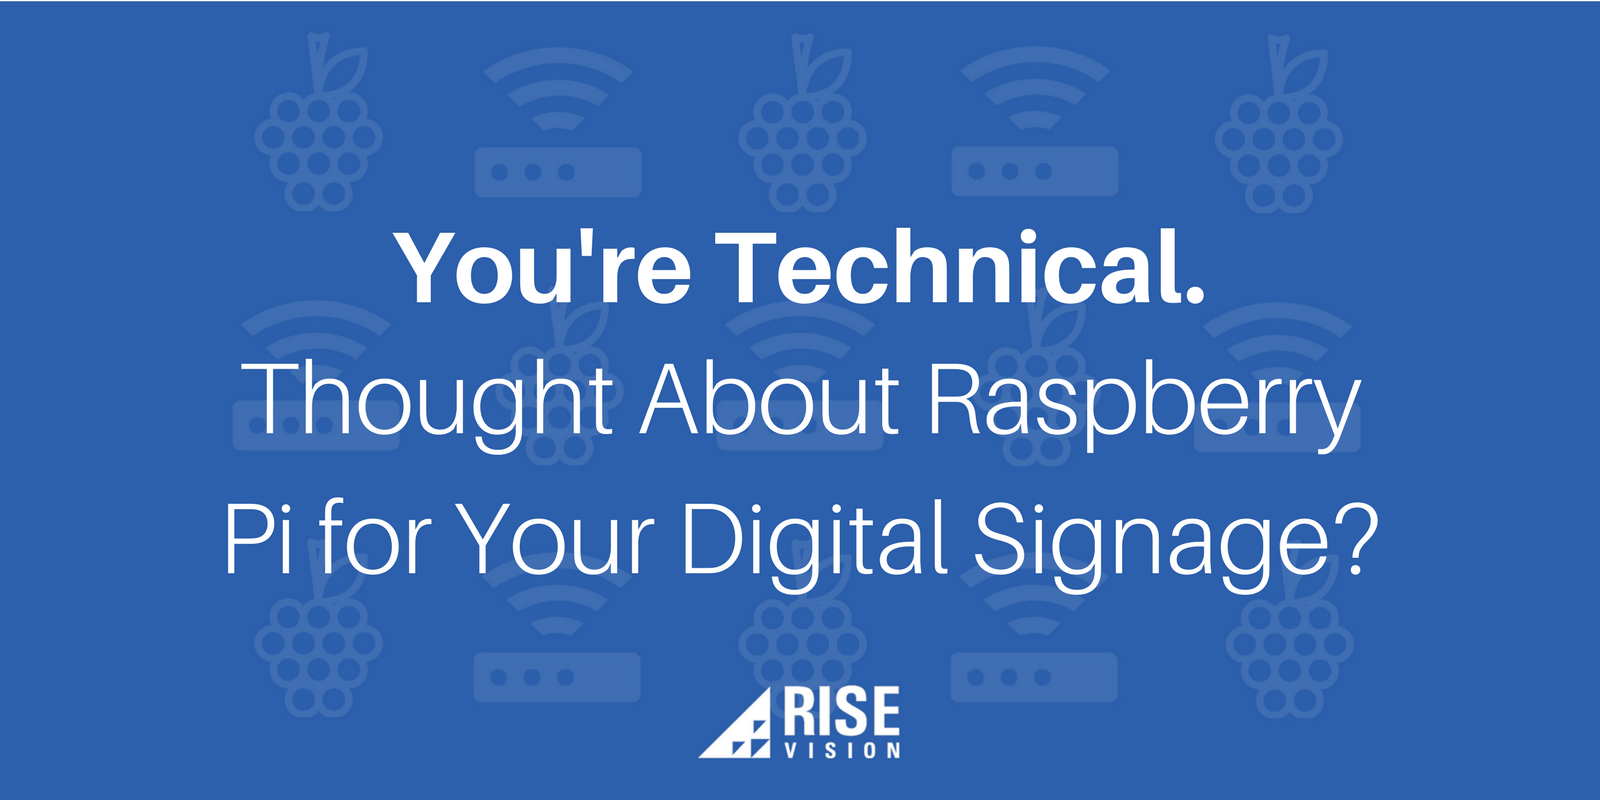 You're Technical. Thought About Raspberry Pi for Your Digital Signage.png